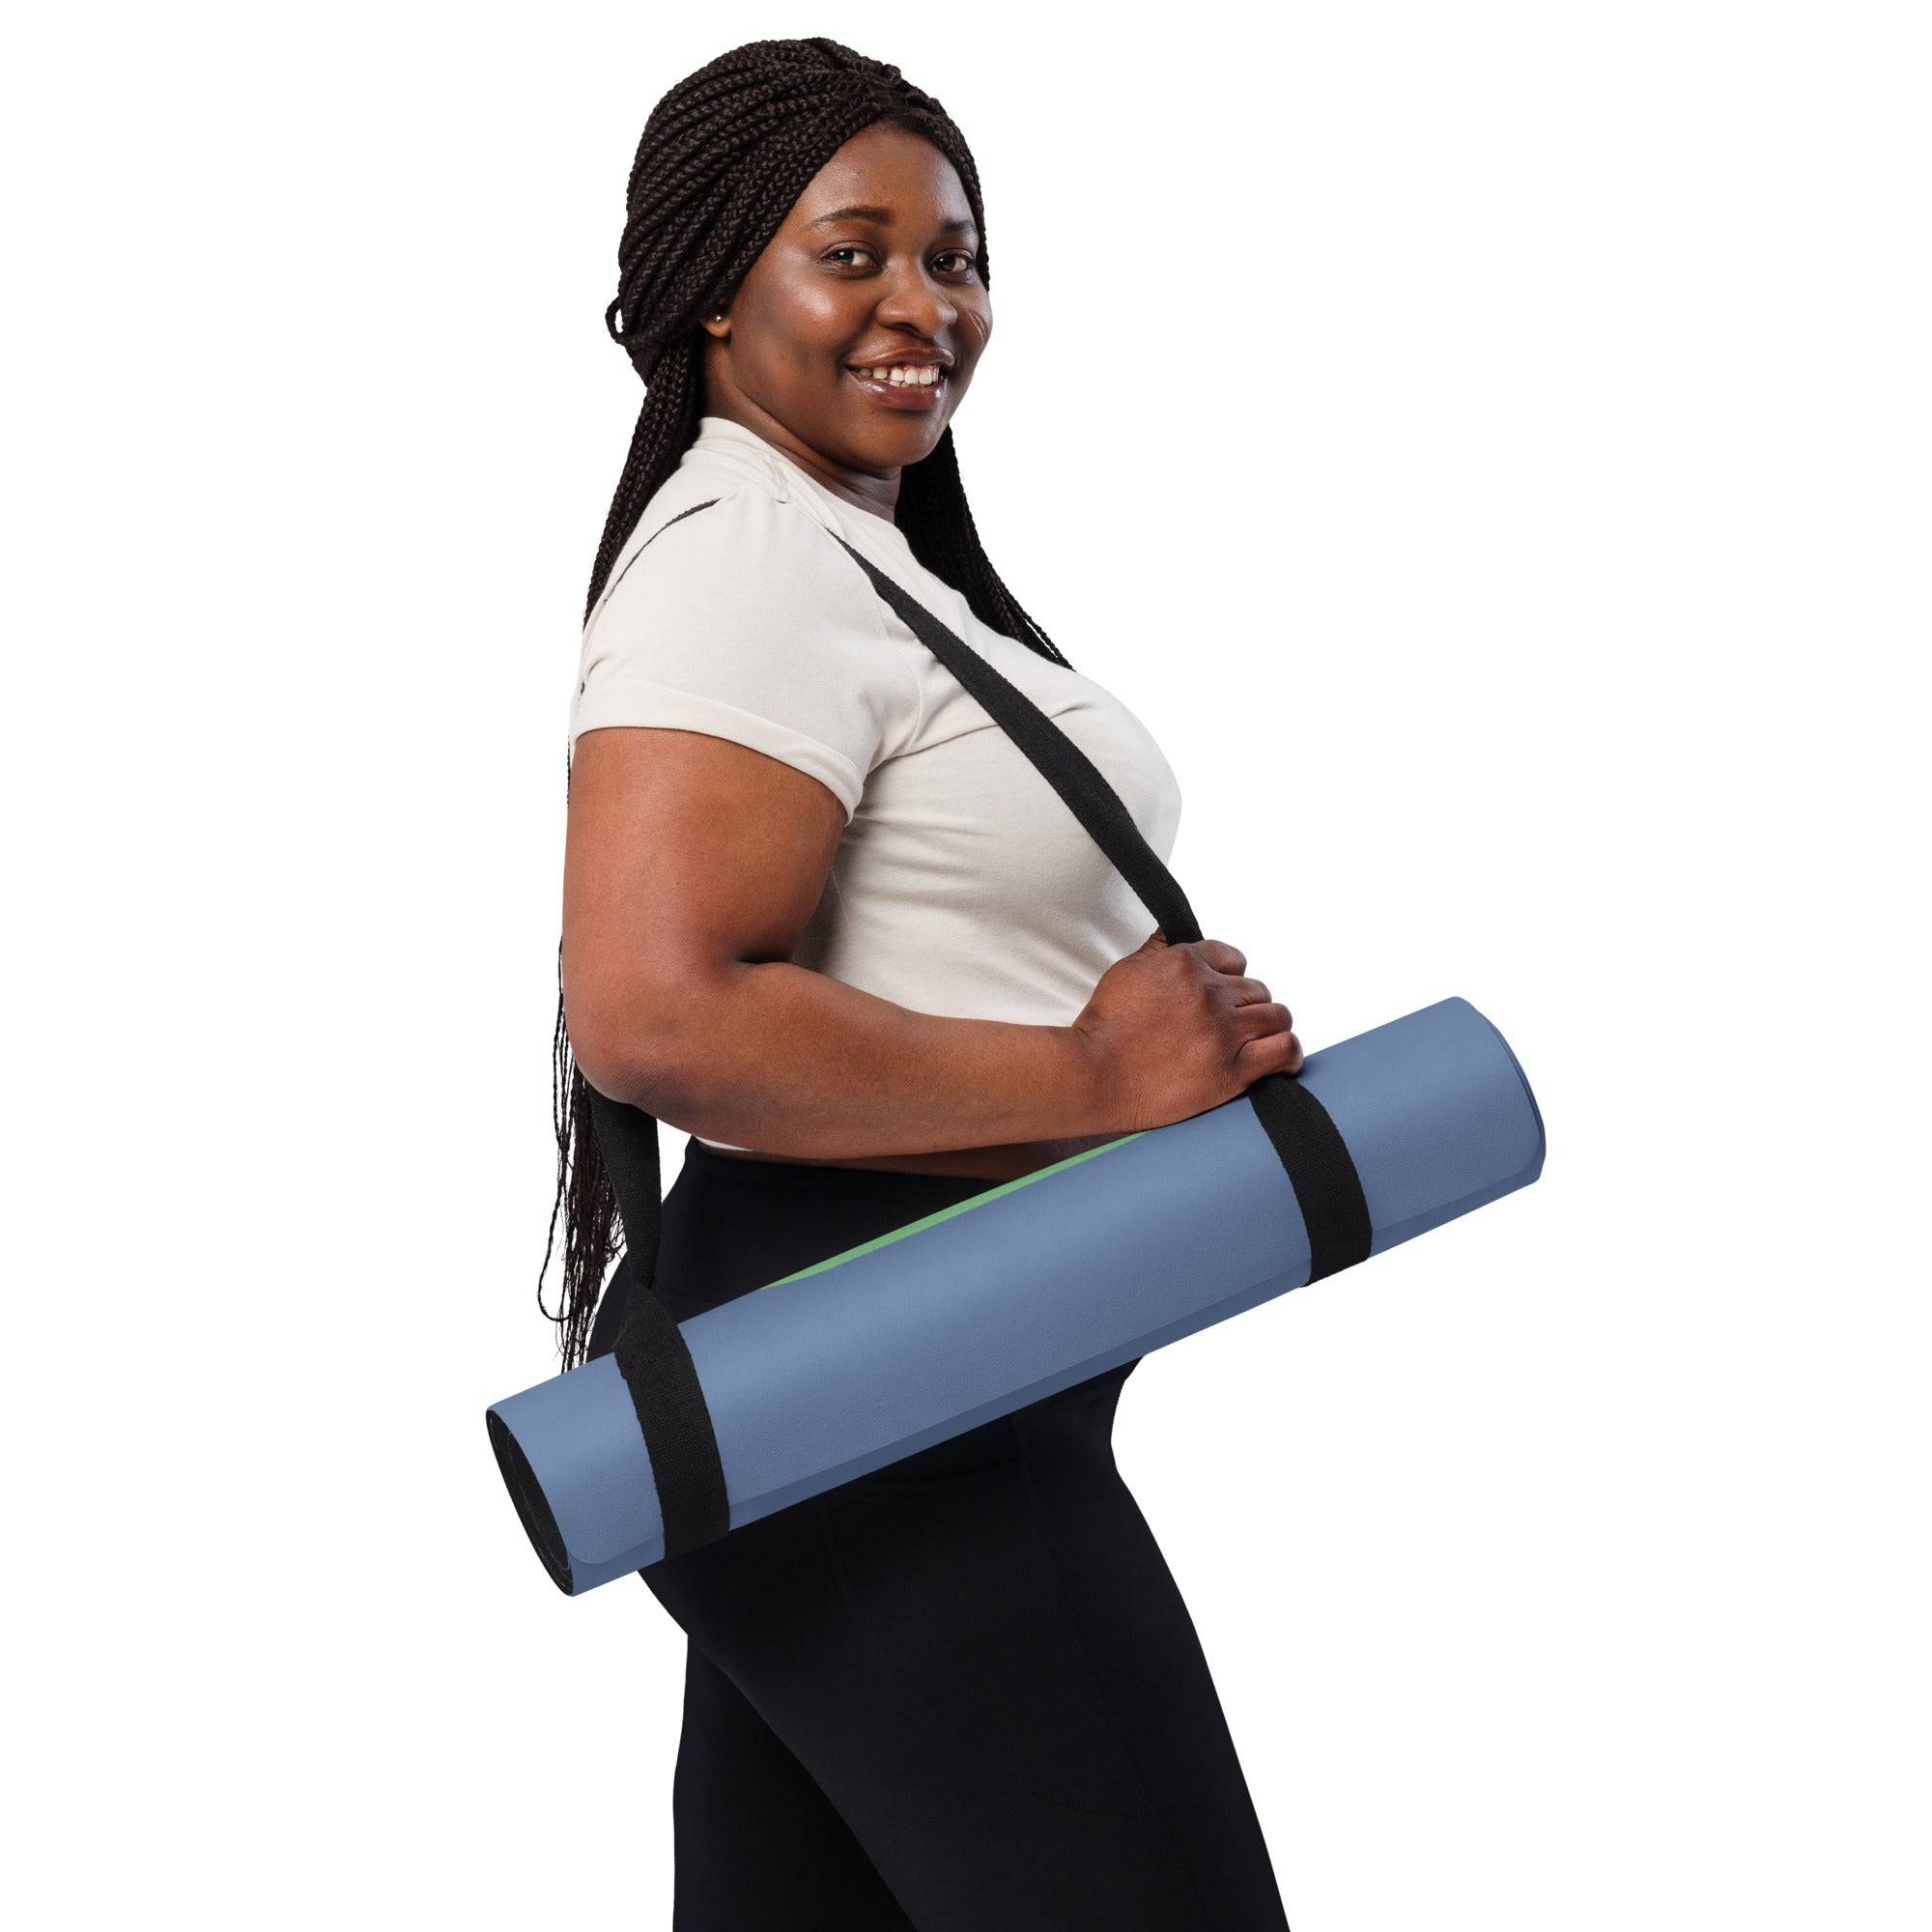 Yoga Mat Blue Serenity Calming Zen Design - Revive Wear     Yoga Mat Blue Serenity. Our anti-slip Revive Wear Yoga Mat is hand-made and offers superb cushioning and support, with a convenient carry handle. Shop with free shipping.